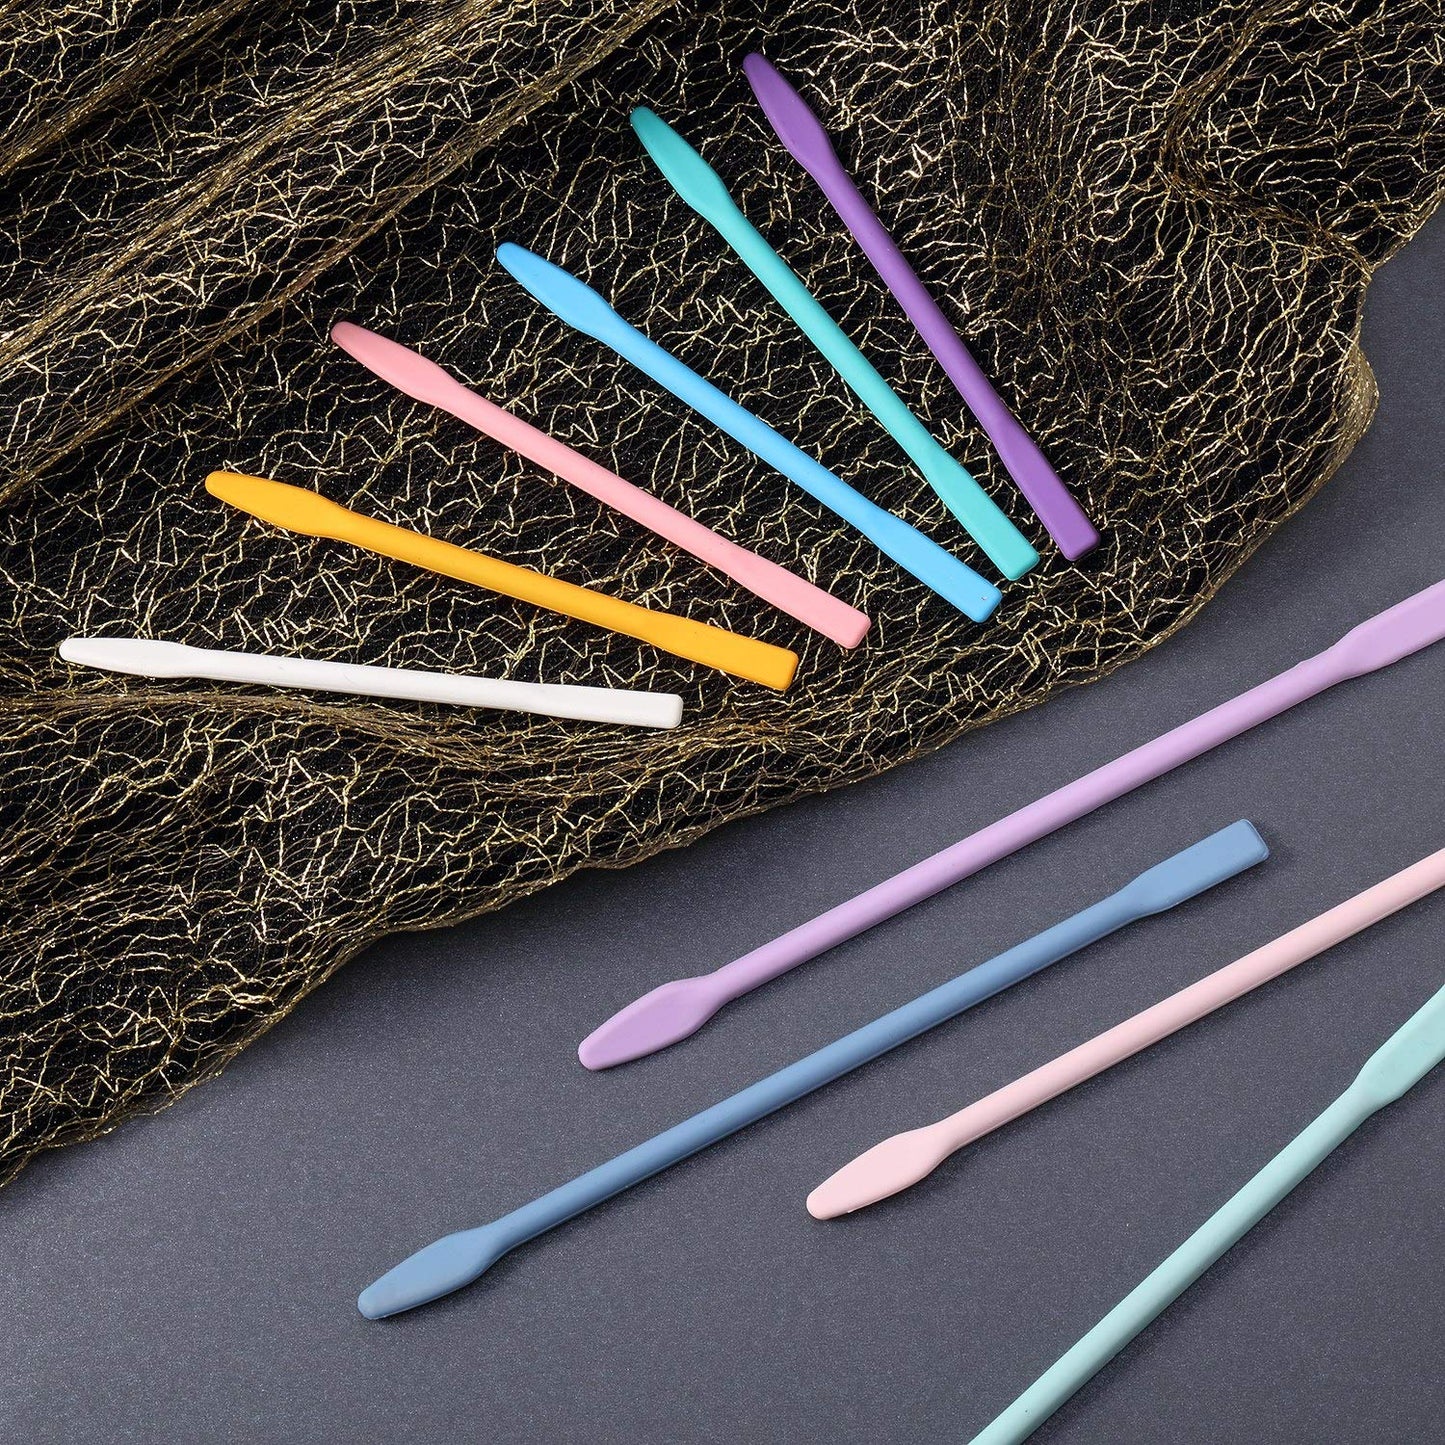 10 Pieces Silicone Stir Sticks Resin Mix Sticks Facial Make Up Stirring Rods for Mixing Resin Liquid Paint Epoxy DIY Crafts, 2 Sizes